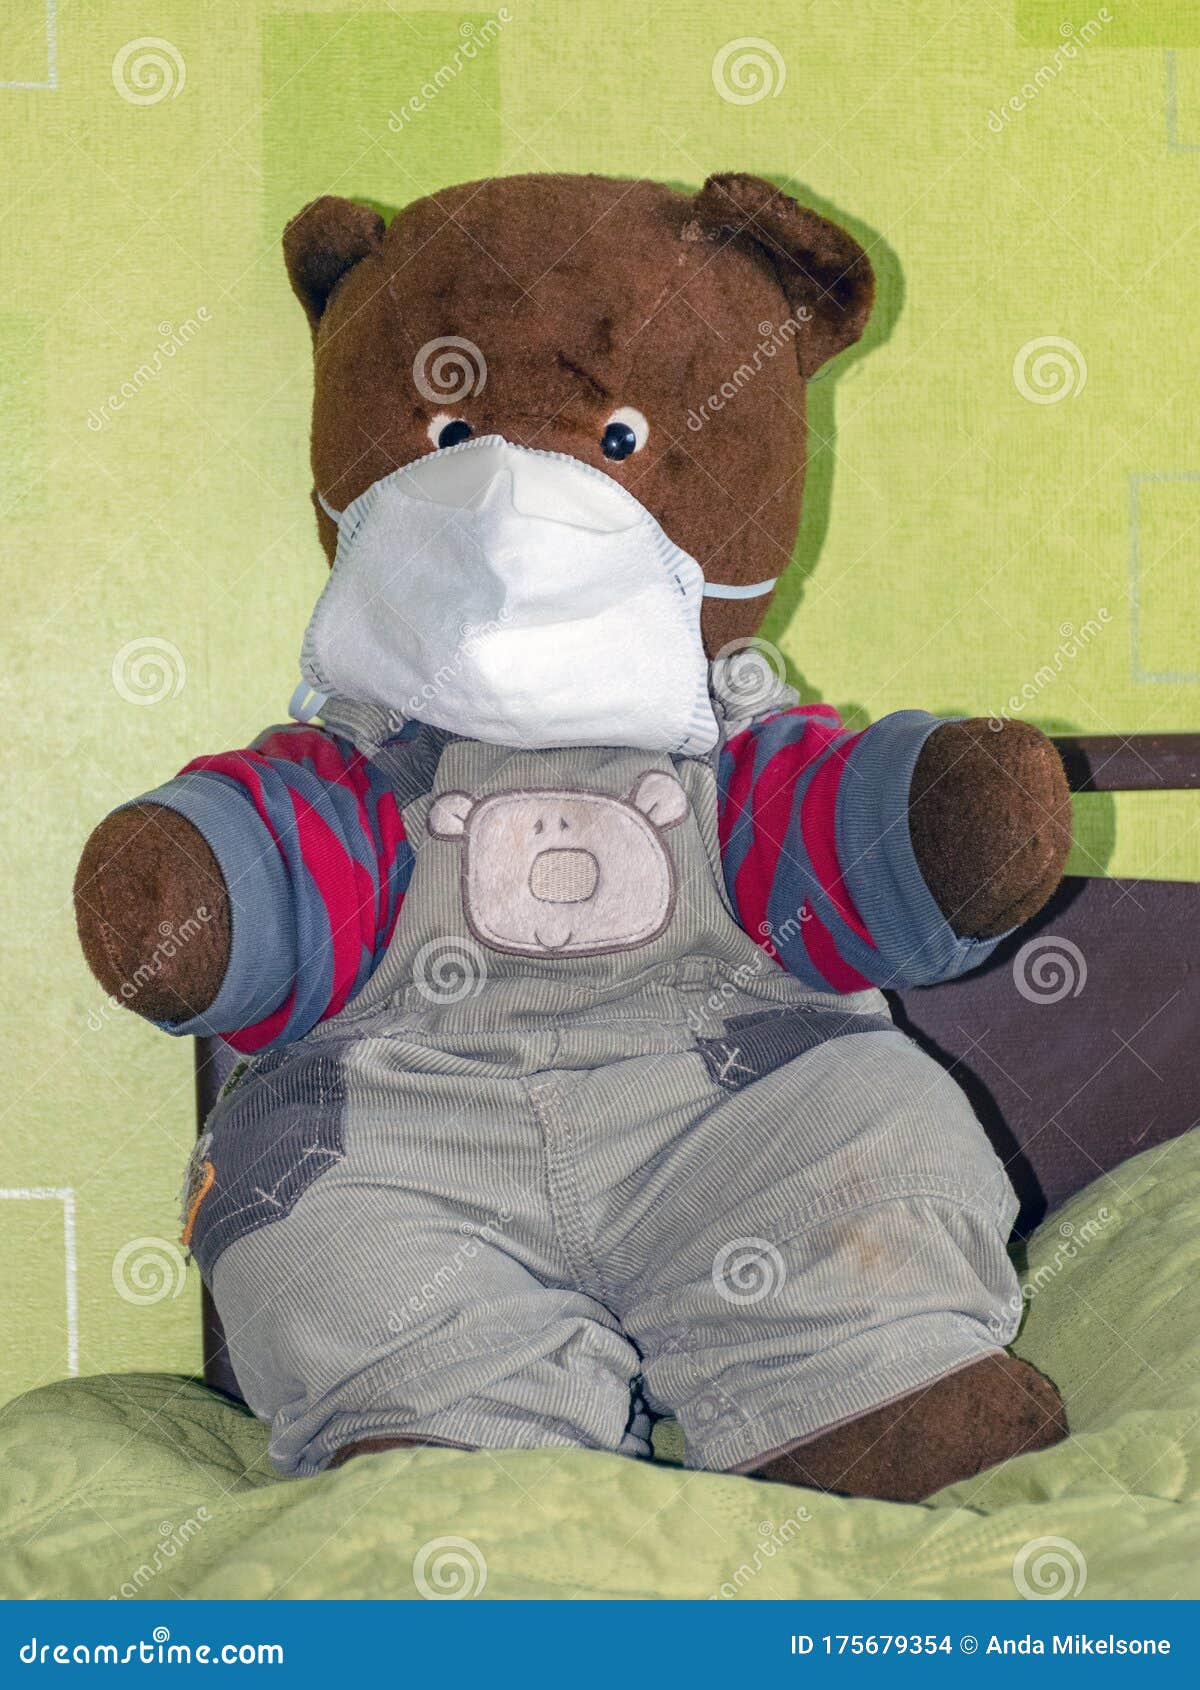 Picture With Old Teddy Bear Face Mask Stock Photo Image Of Mask